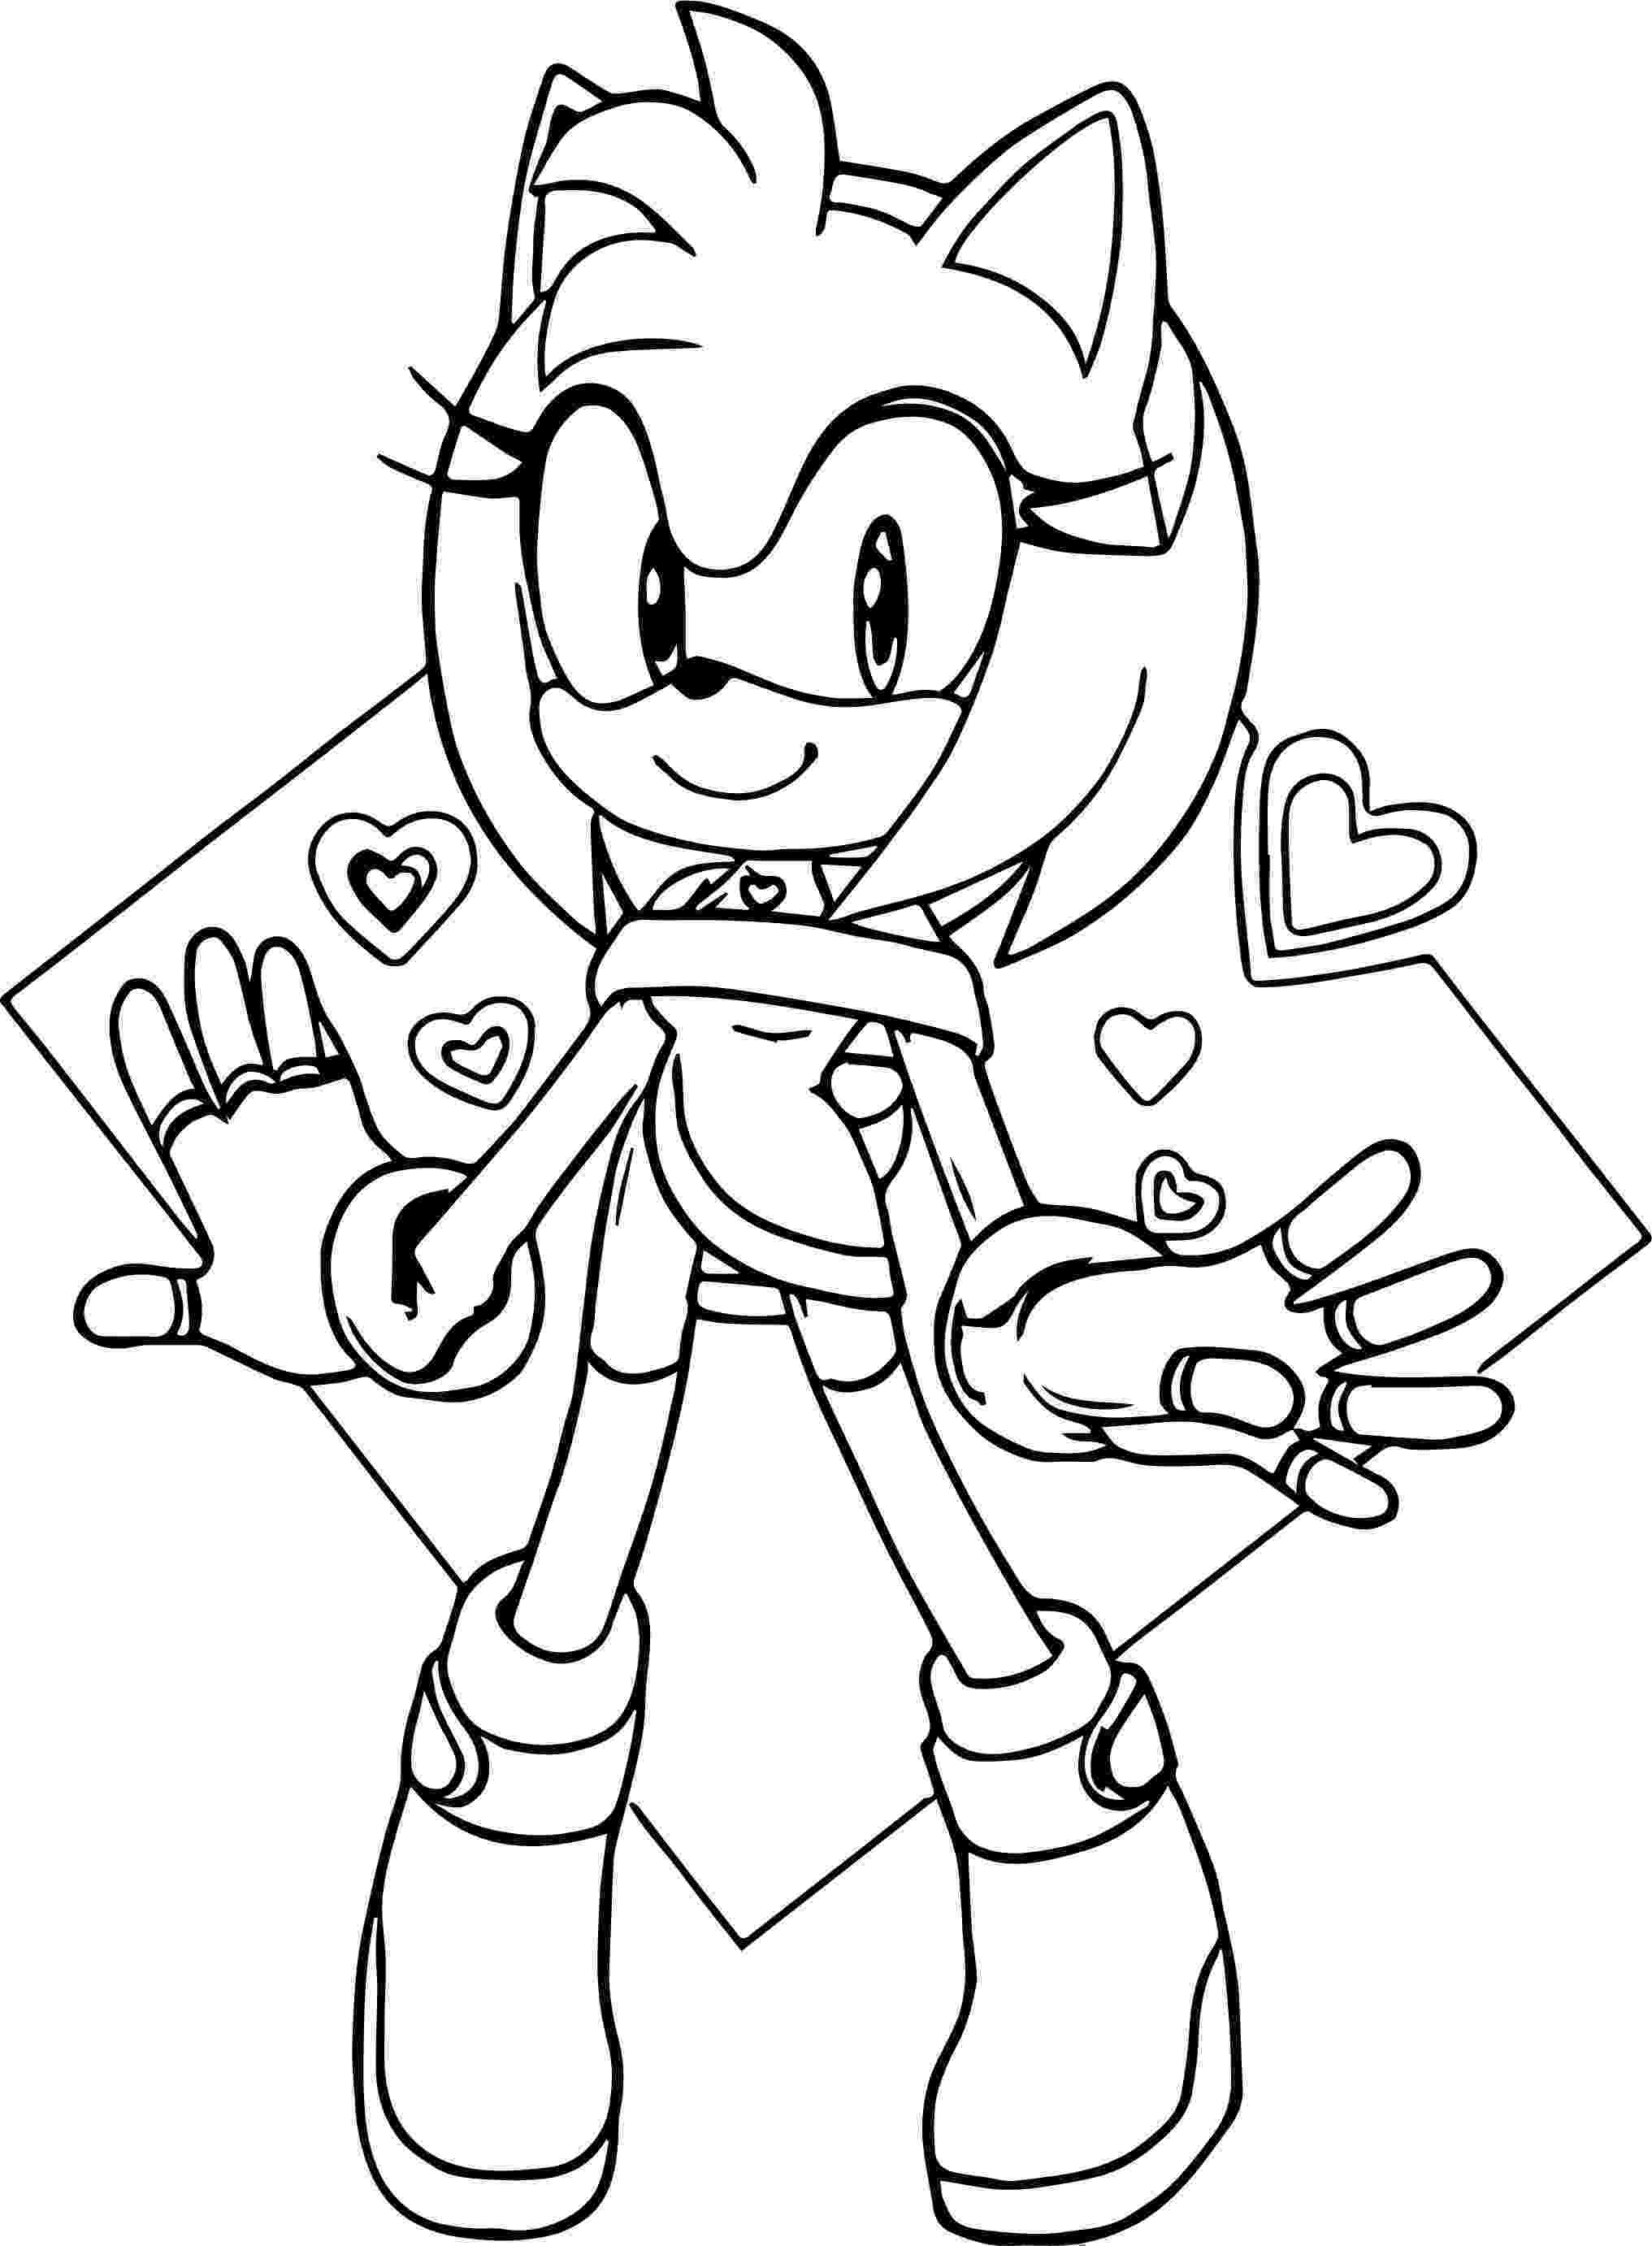 amy rose coloring pages amy rose coloring pages free printable amy rose coloring amy rose pages coloring 